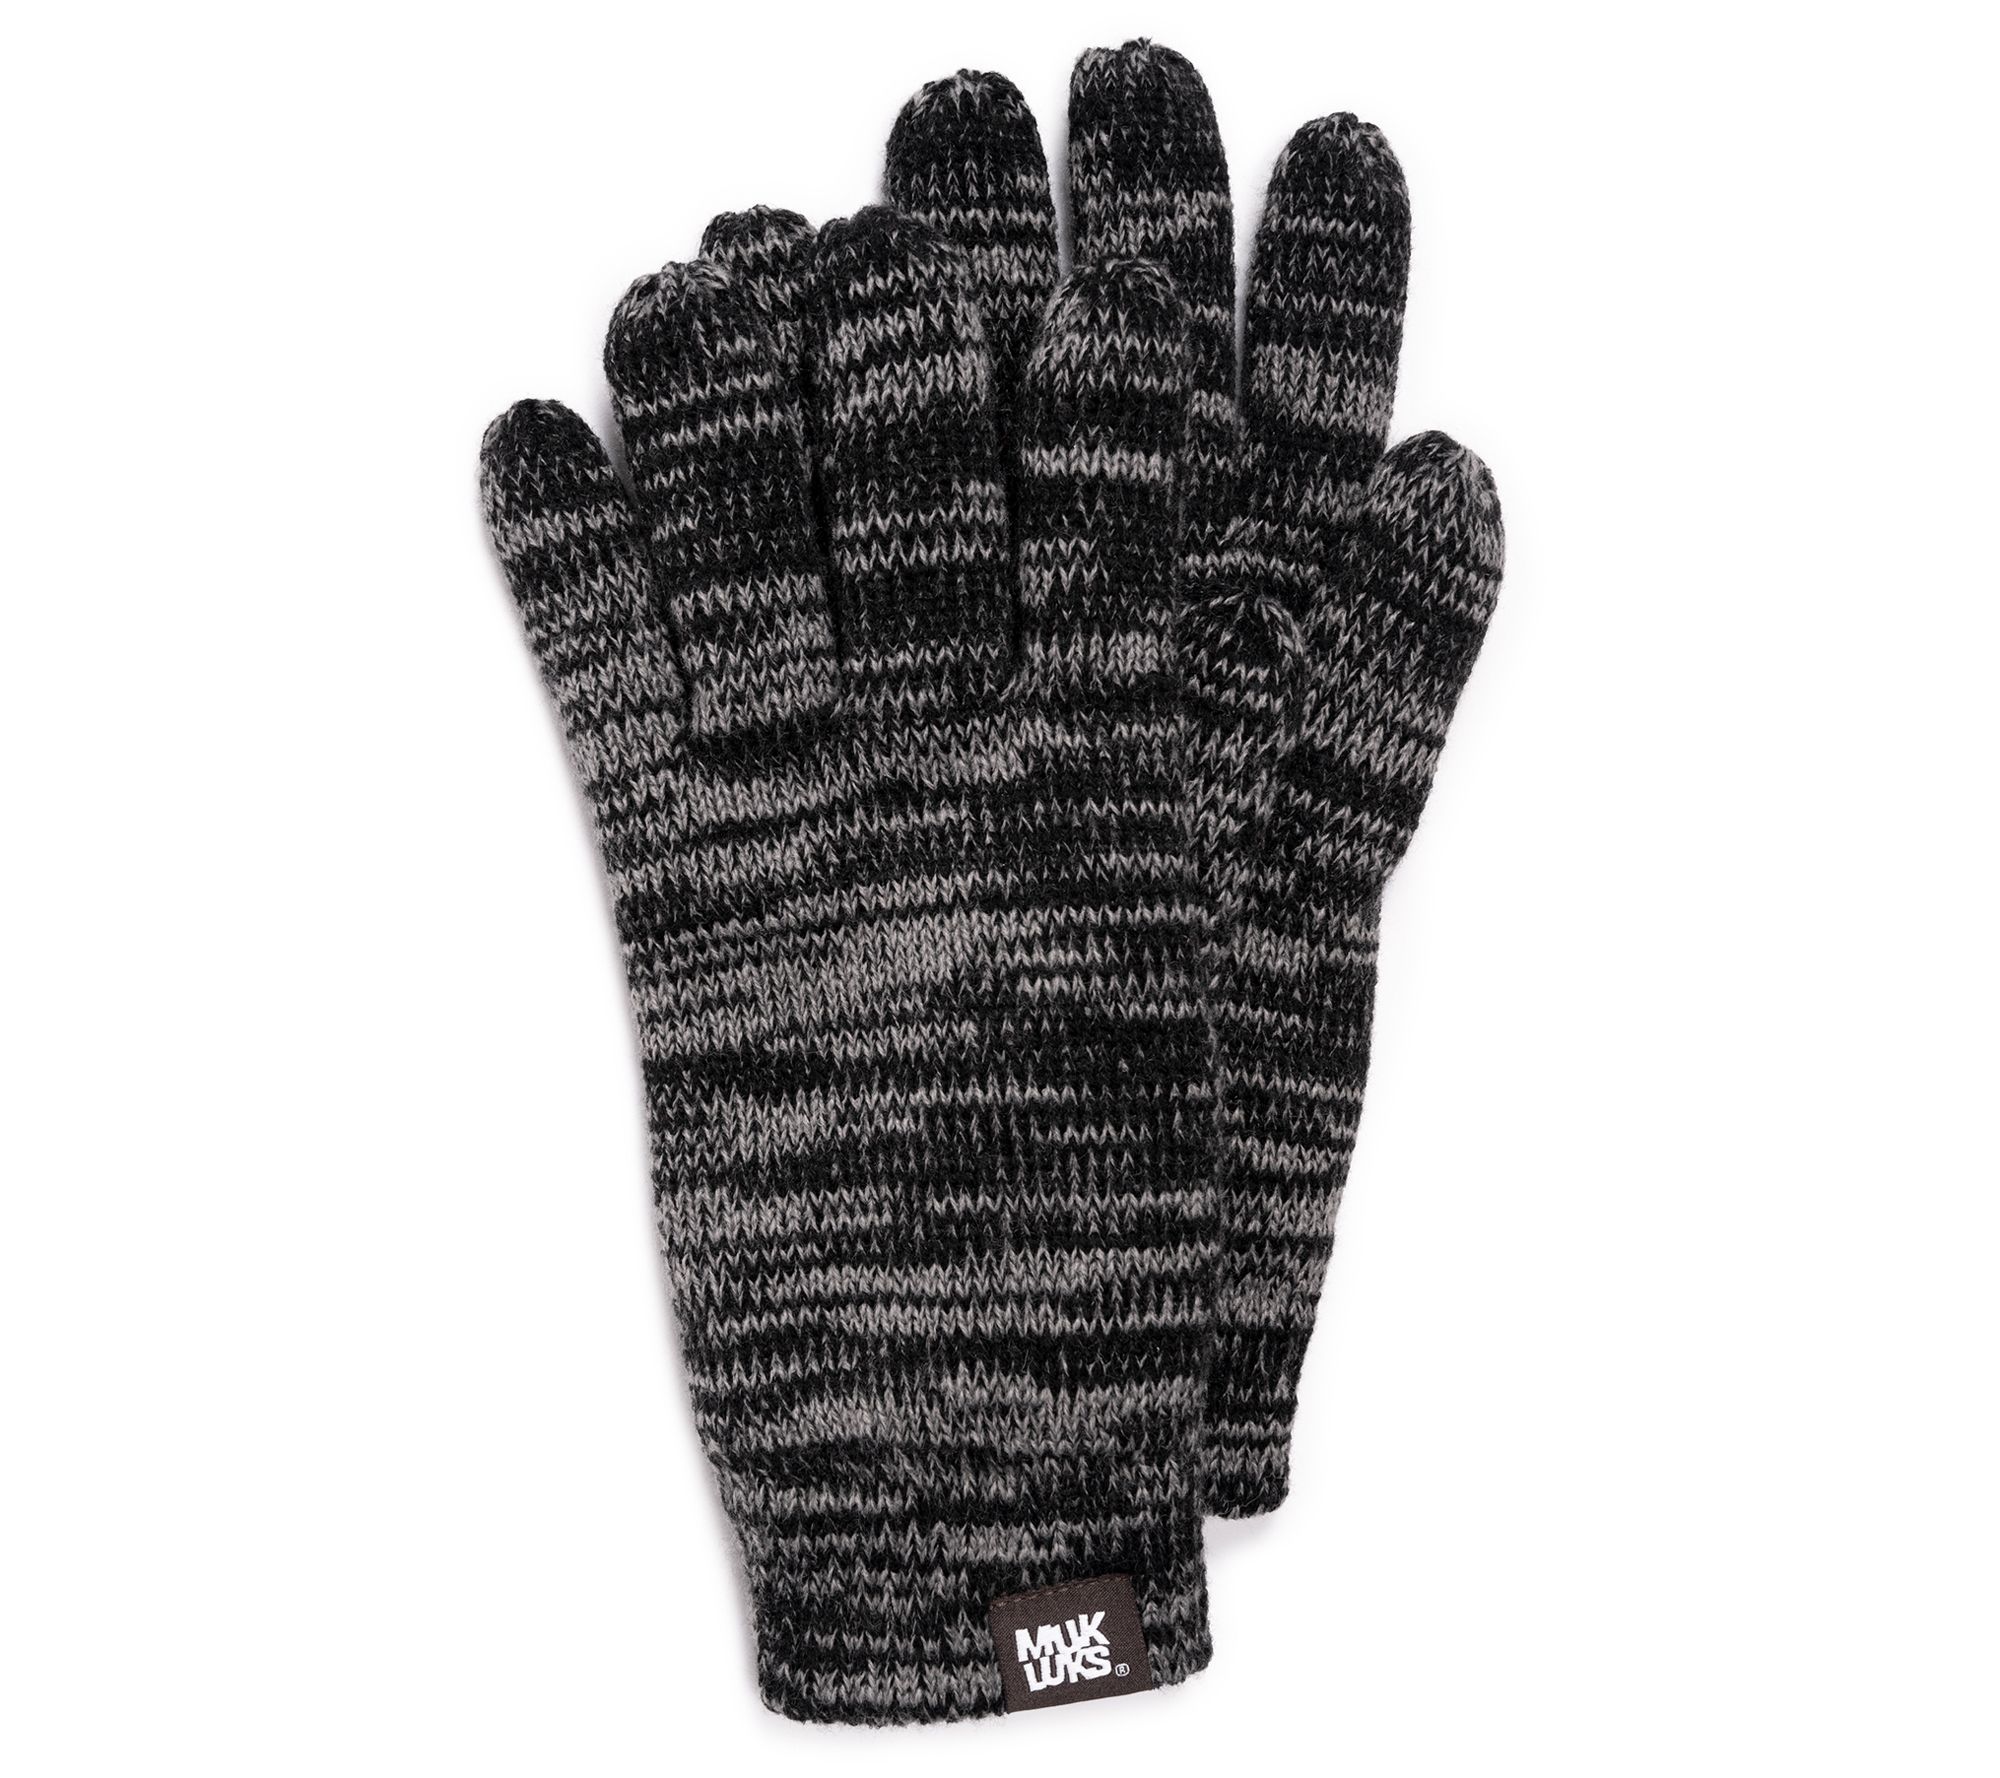 Nike Gloves Knitted Mens Knit Grip 2.0 Black Phone Use Cold Weather Brand  New